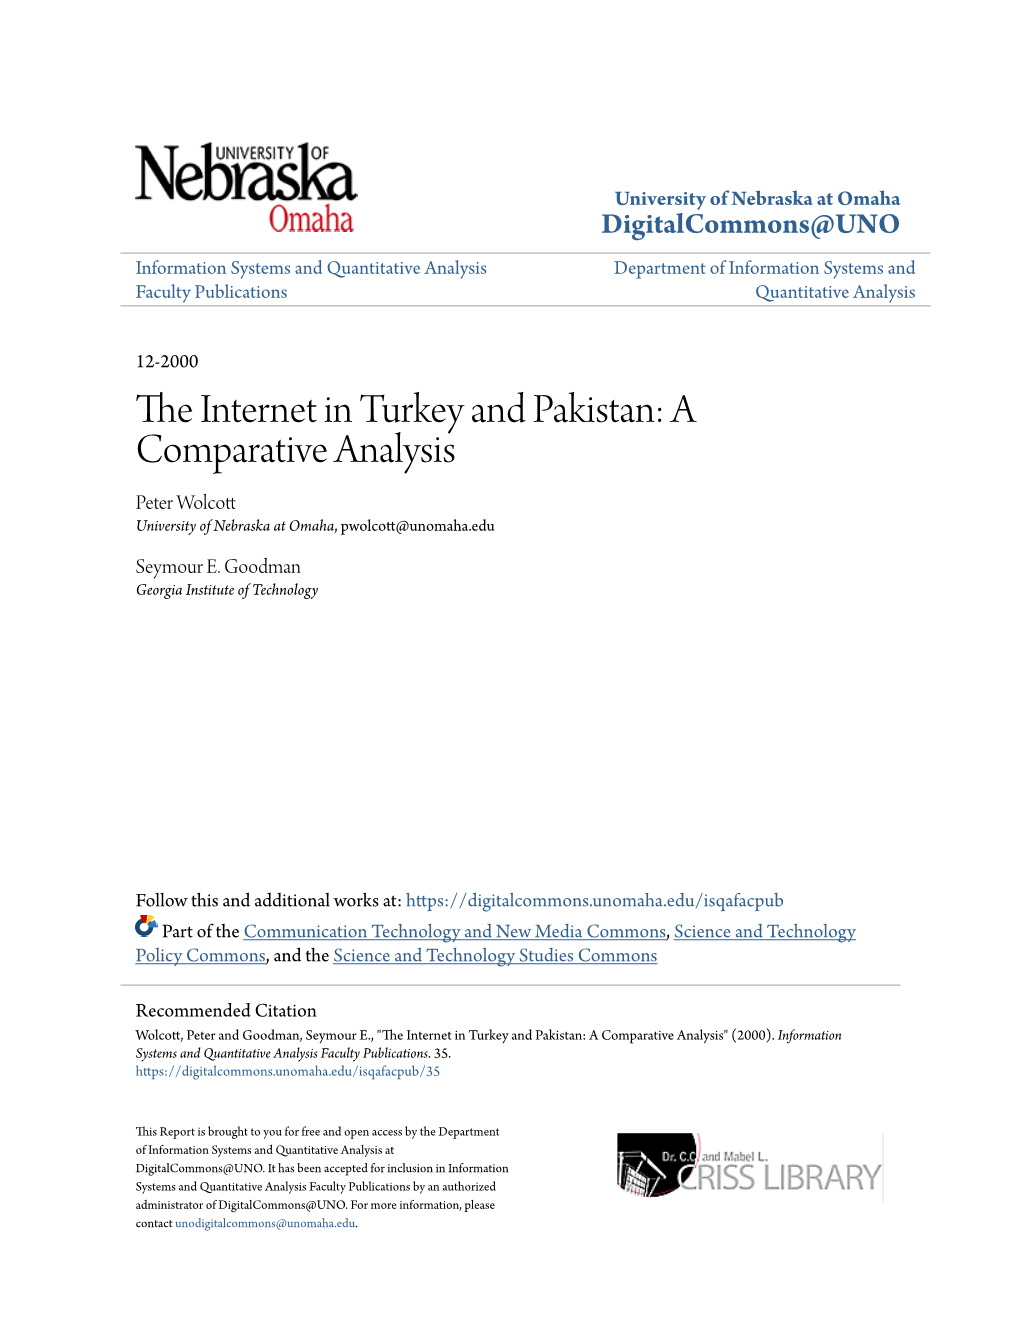 The Internet in Turkey and Pakistan: a Comparative Analysis